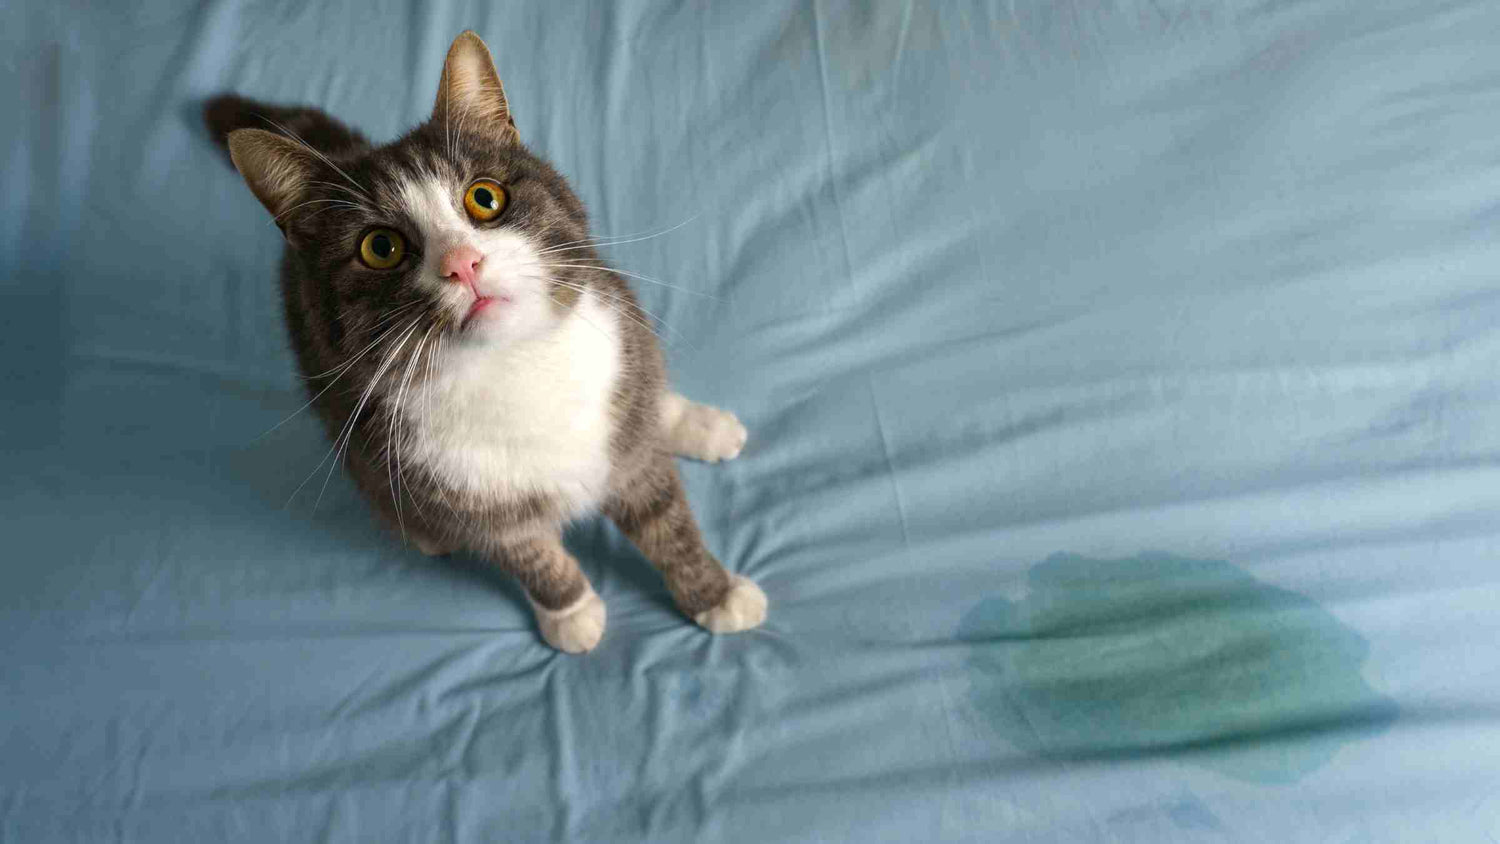 Grey and white cat looking up with a guilty expression next to a wet spot on a blue bed sheet, illustrating issues with cat urination outside the litter box.